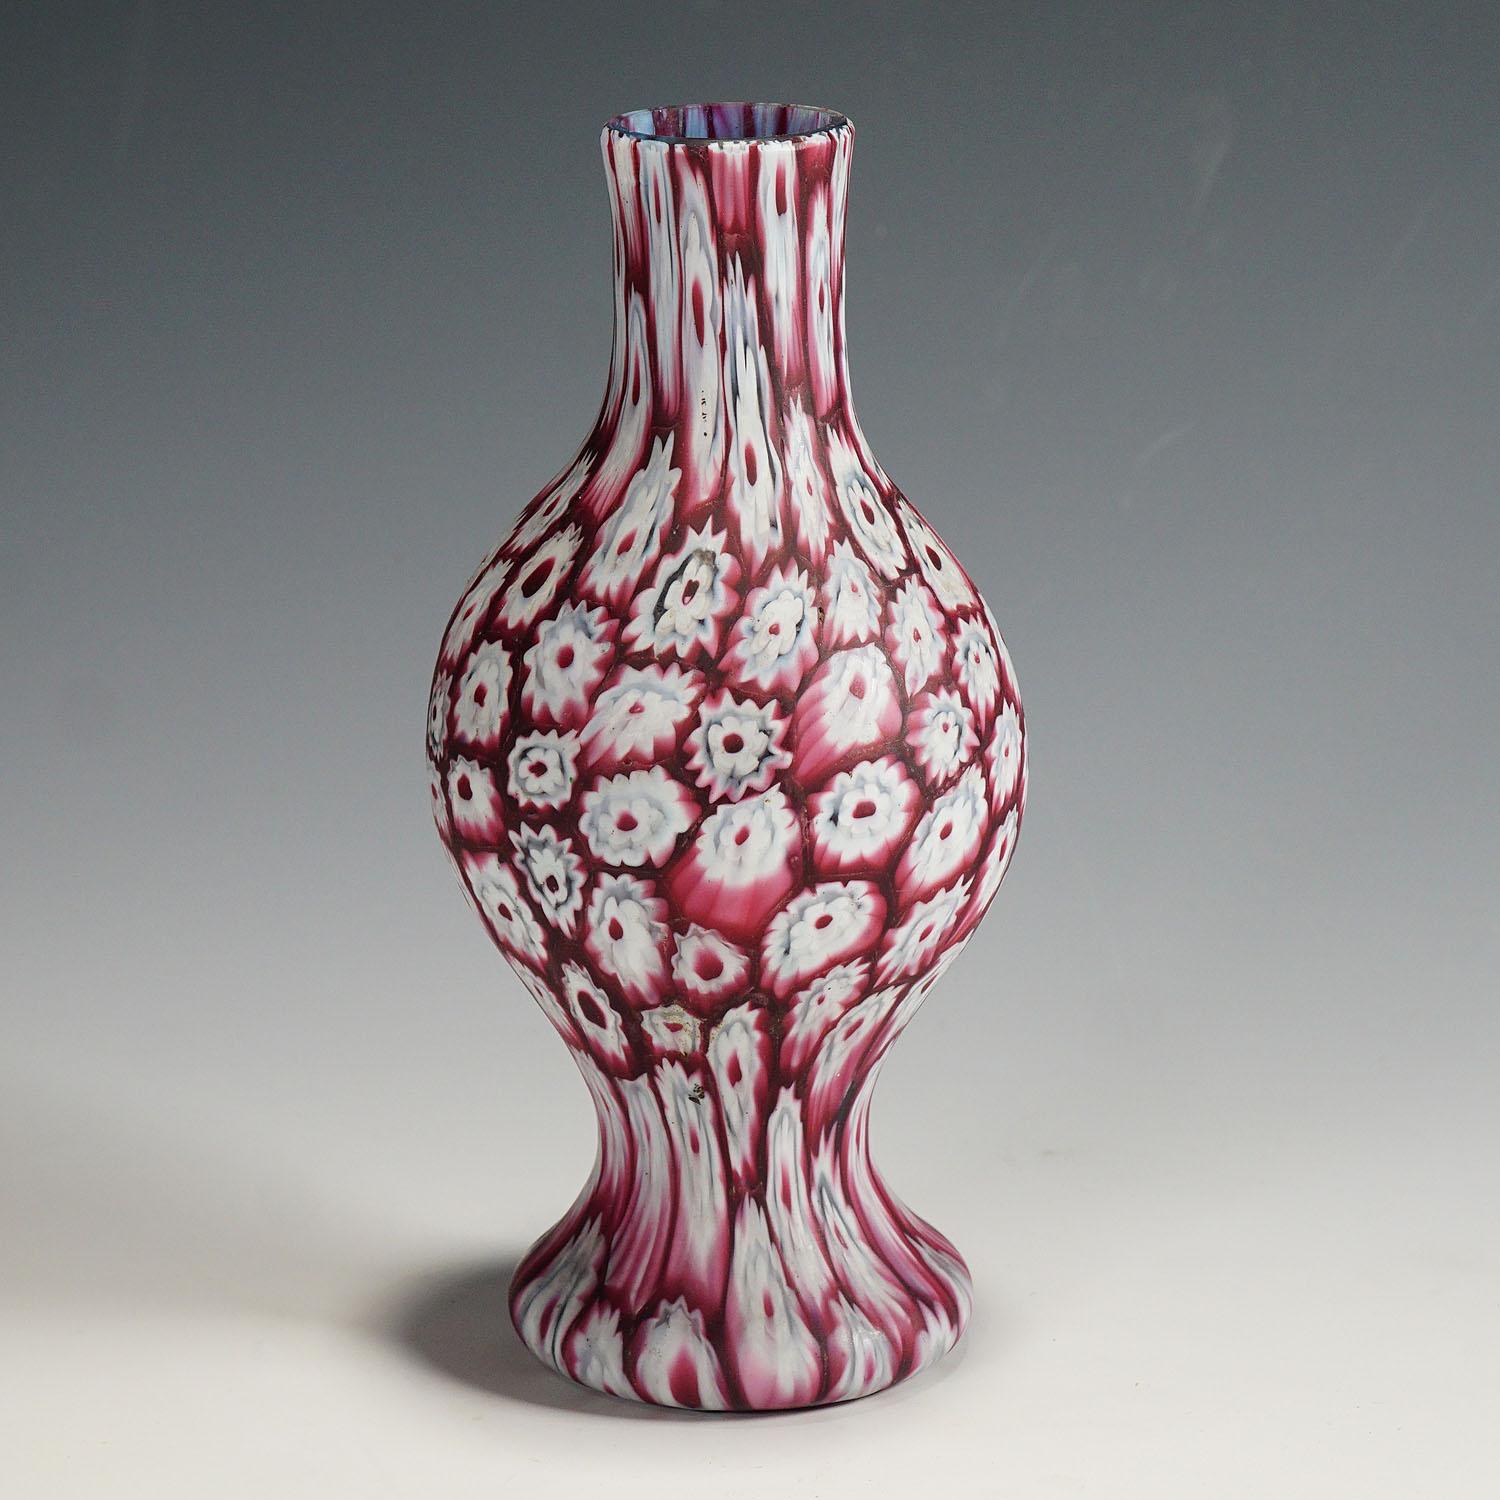 A very nice murrine glass vase, manufactured by Vetreria Fratelli Toso early 20th century. The vase is executed with polychrome red and white millefiori murrines arranged in vertical rows on a blue glass body. An authentic example of early 20th